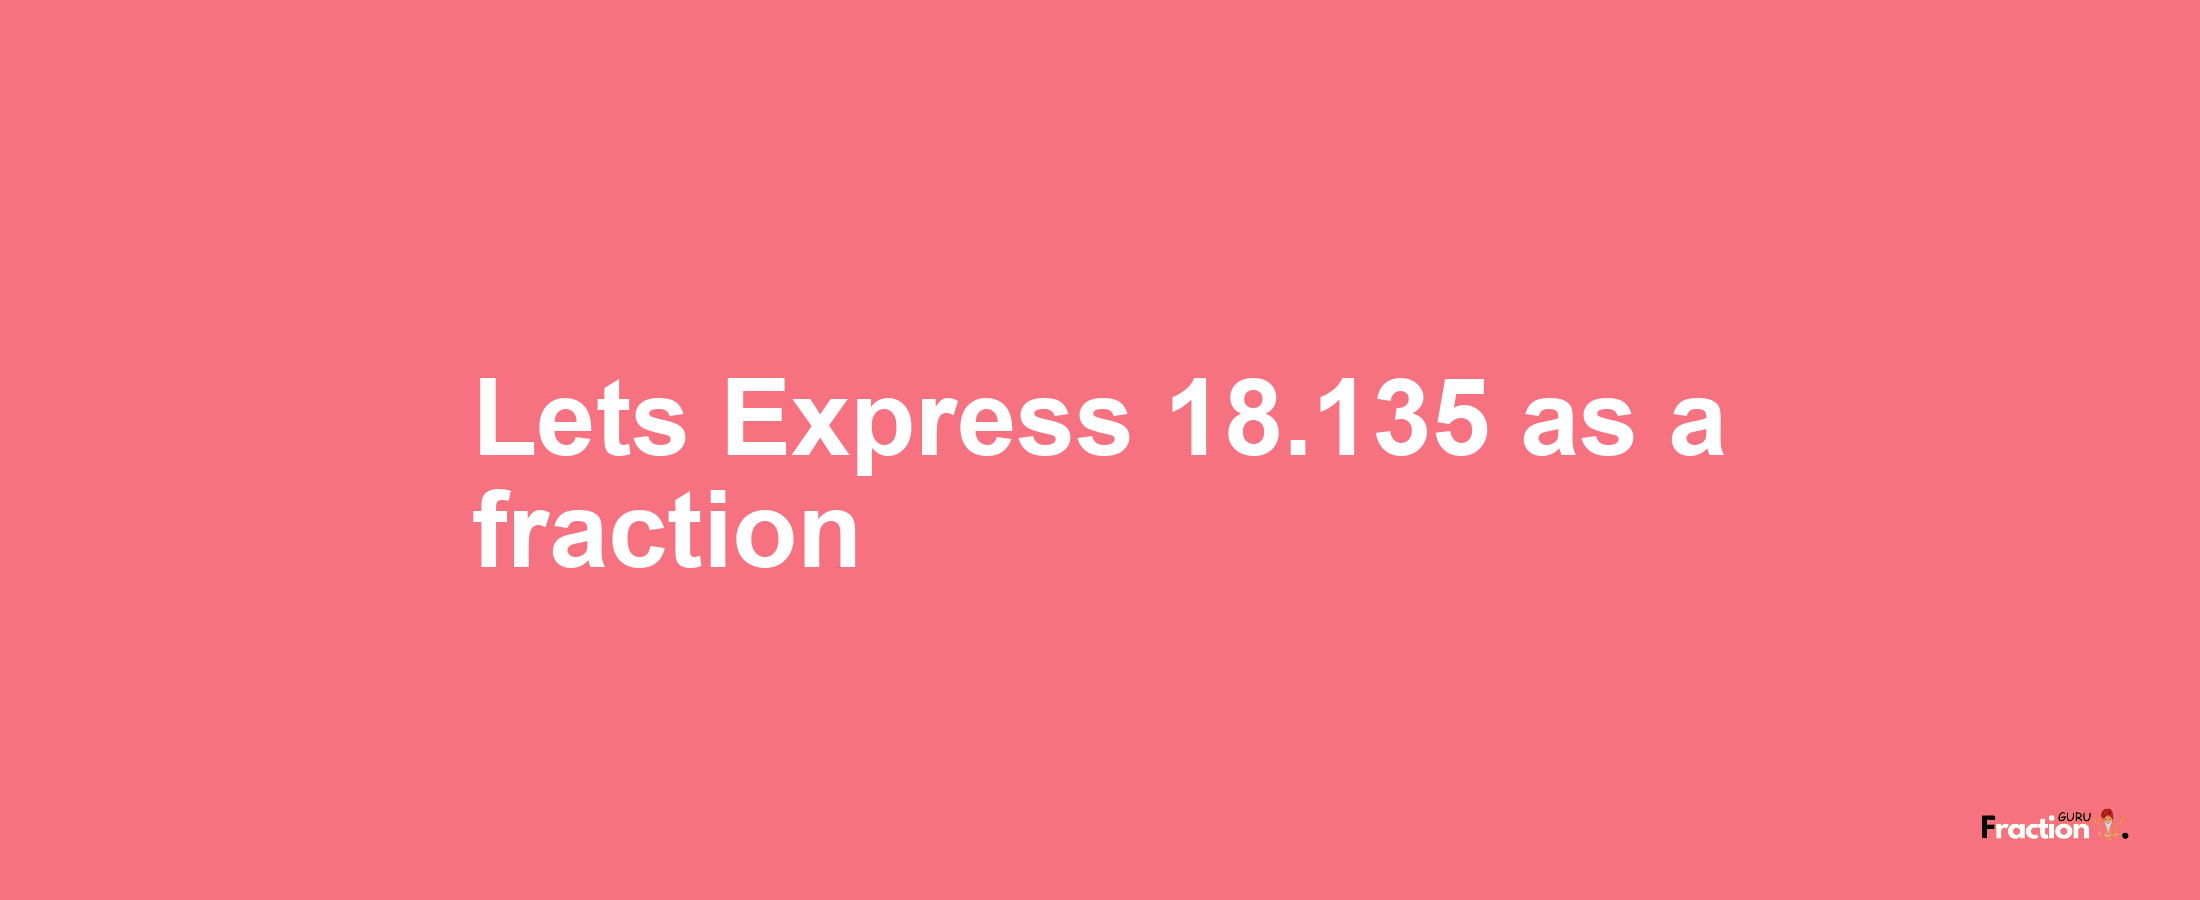 Lets Express 18.135 as afraction